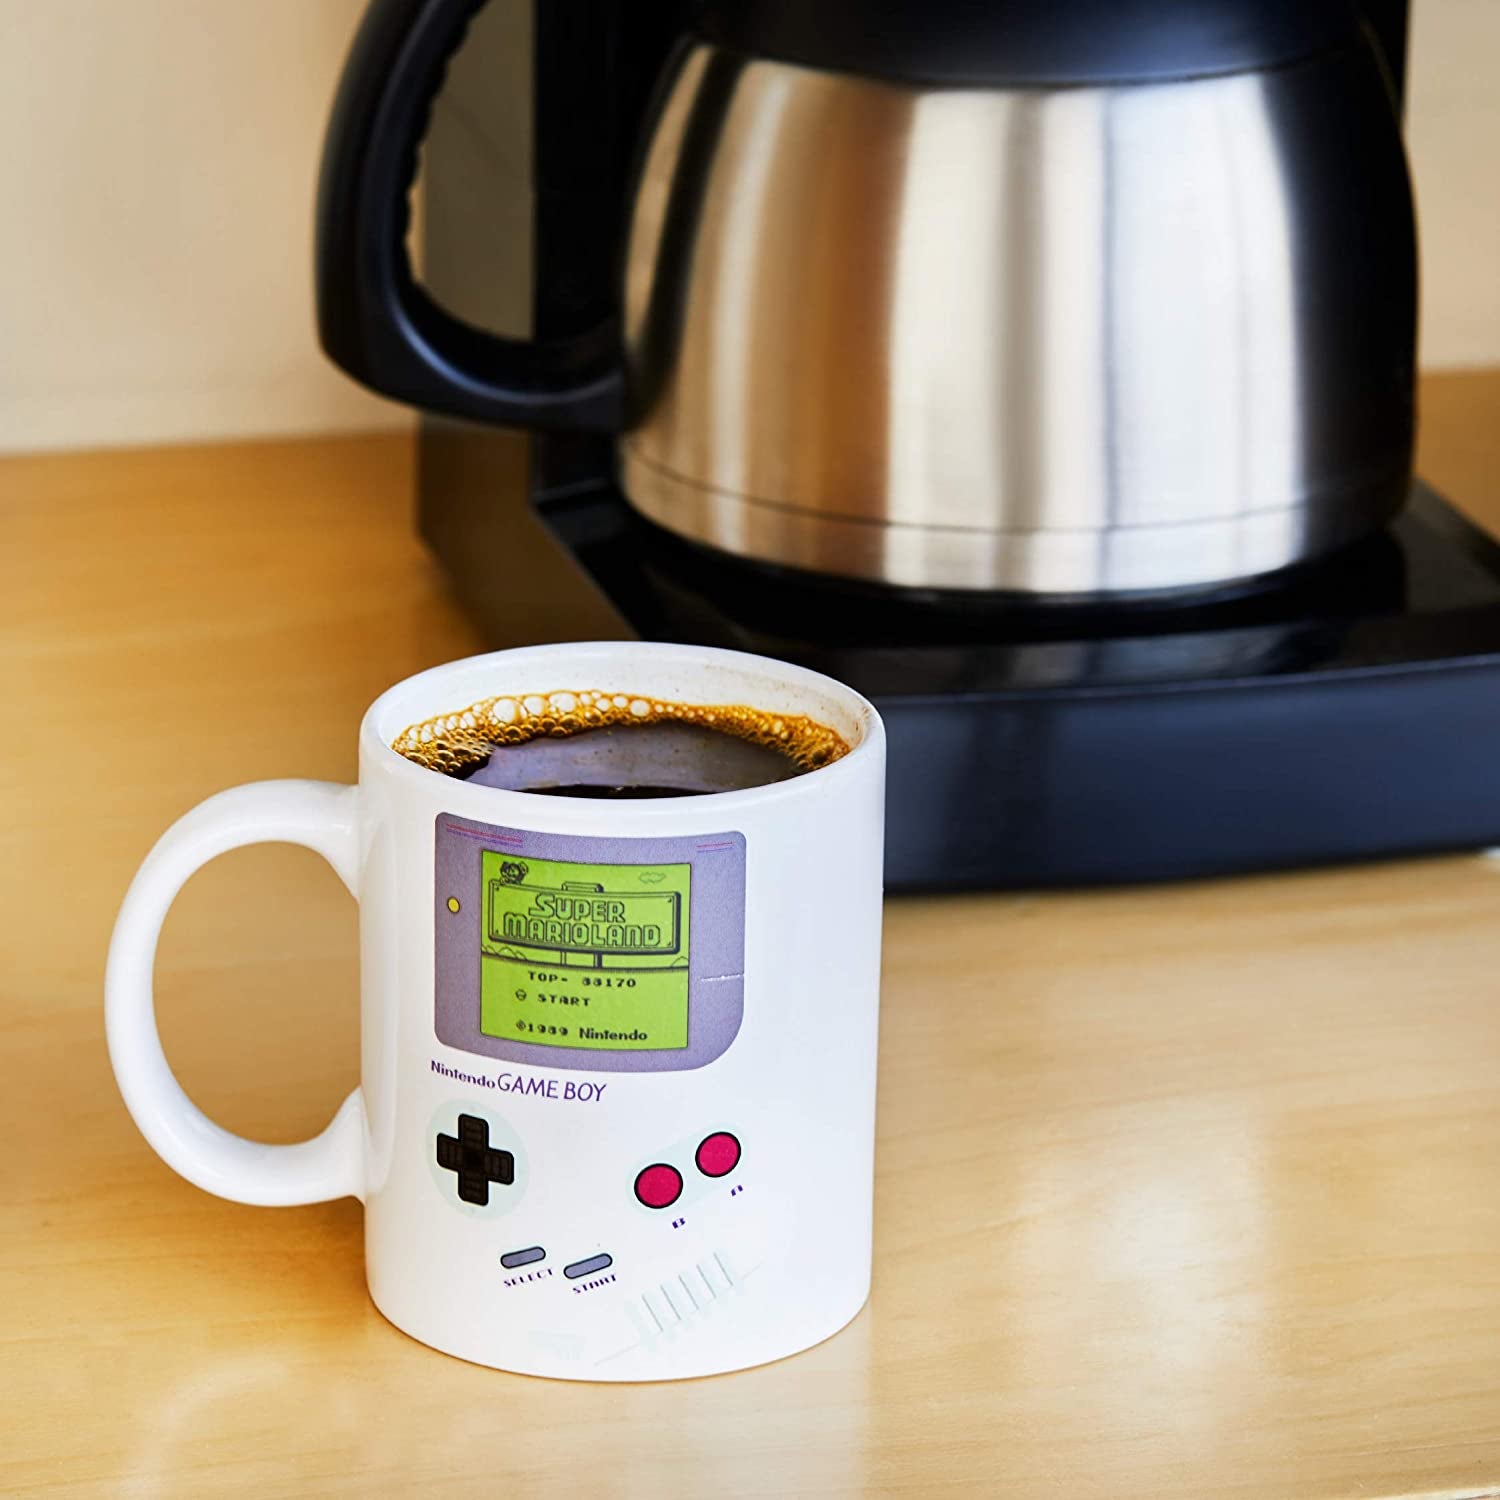 the game boy mug filled with coffee